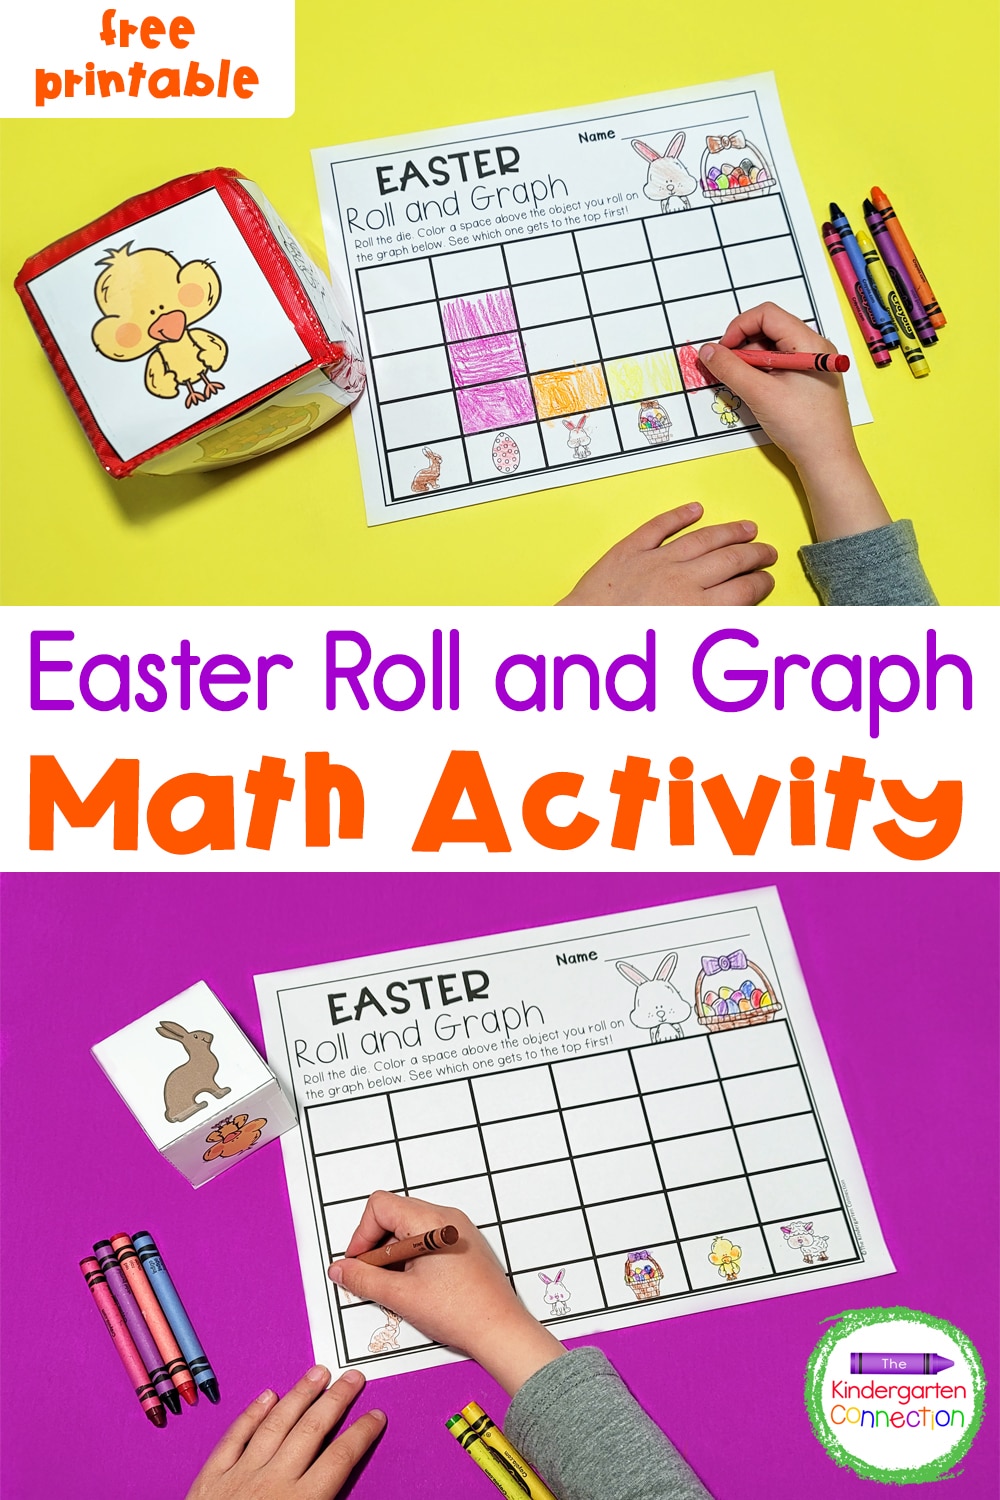 This free printable Roll and Graph Easter Math Activity is the perfect addition to your Kindergarten math centers this Easter season!